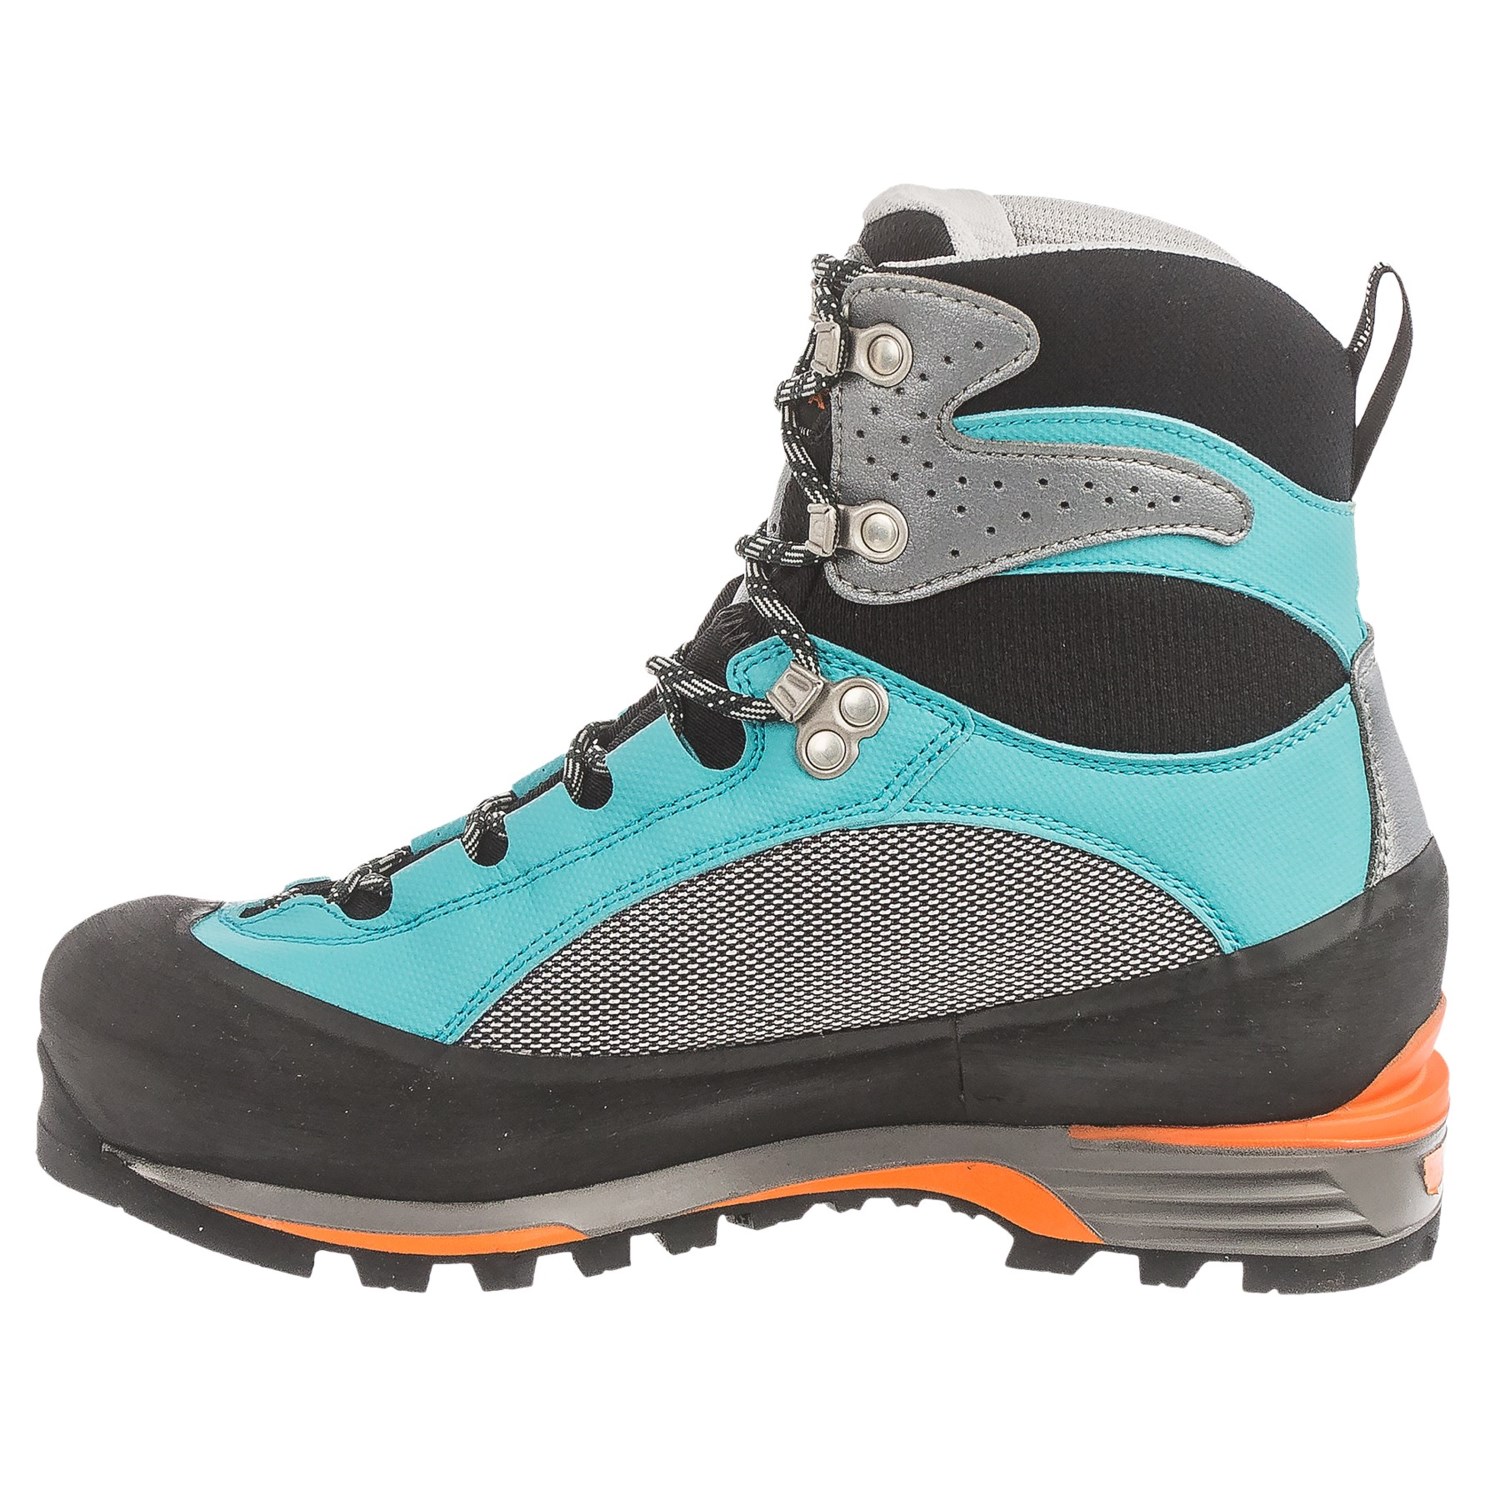 Scarpa Charmoz Pro Gore-Tex® Mountaineering Boots (For Women) - Save 39%